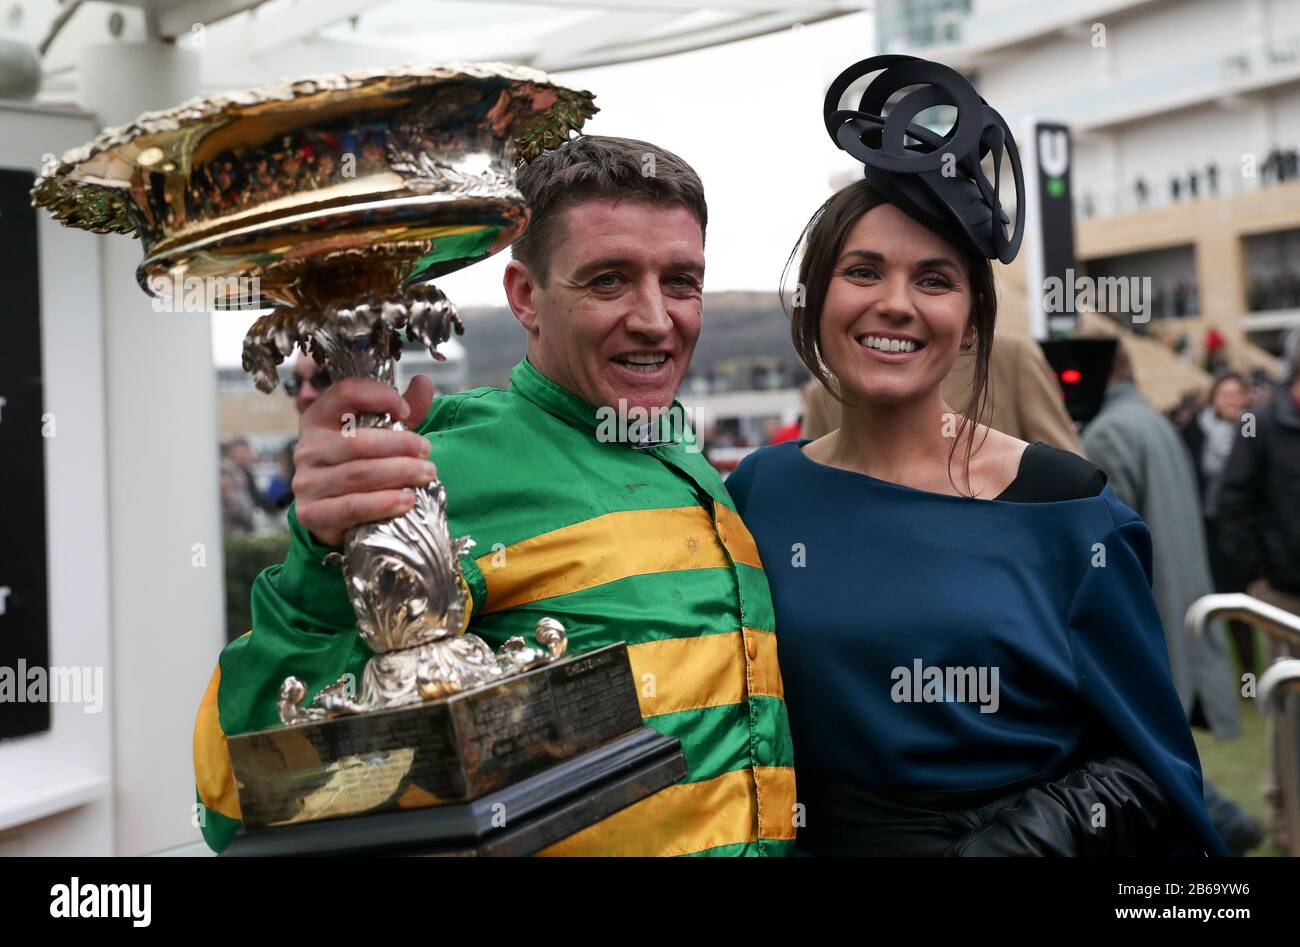 Winning Jockey of of Epatante, Barry Geraghty following victory in the Unibet Champion Hurdle Challenge Trophy on day one of the Cheltenham Festival at Cheltenham Racecourse, Cheltenham. Stock Photo